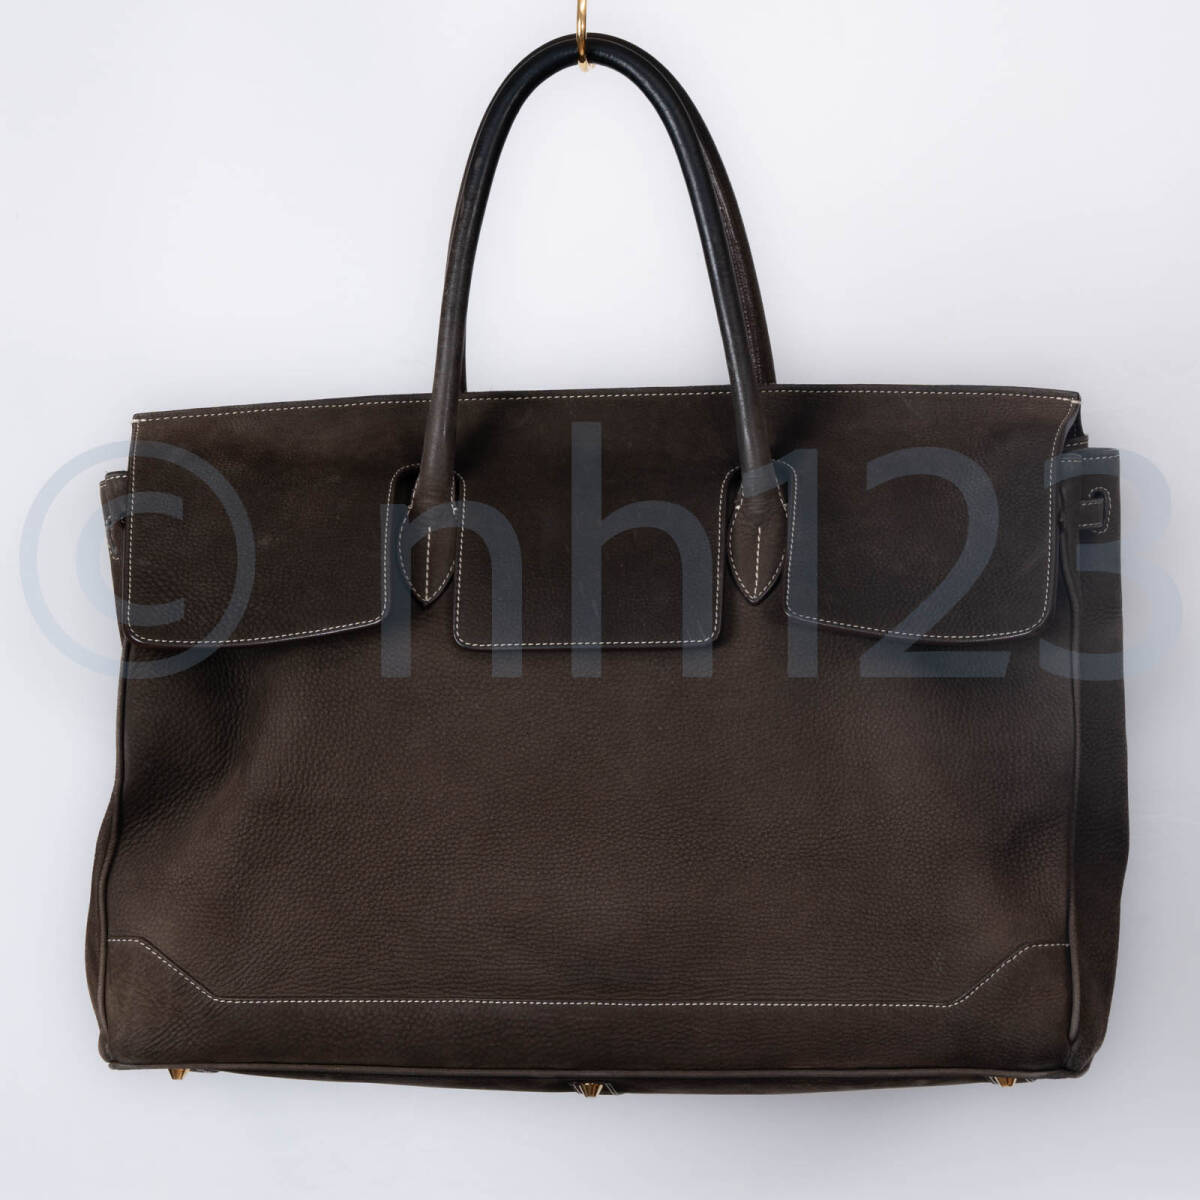 Acate Ostro tote bag Boston bag n back leather bag original leather a car teCHAMBORD SELLIER CISEI SERAPIAN large . made bag who looks for .